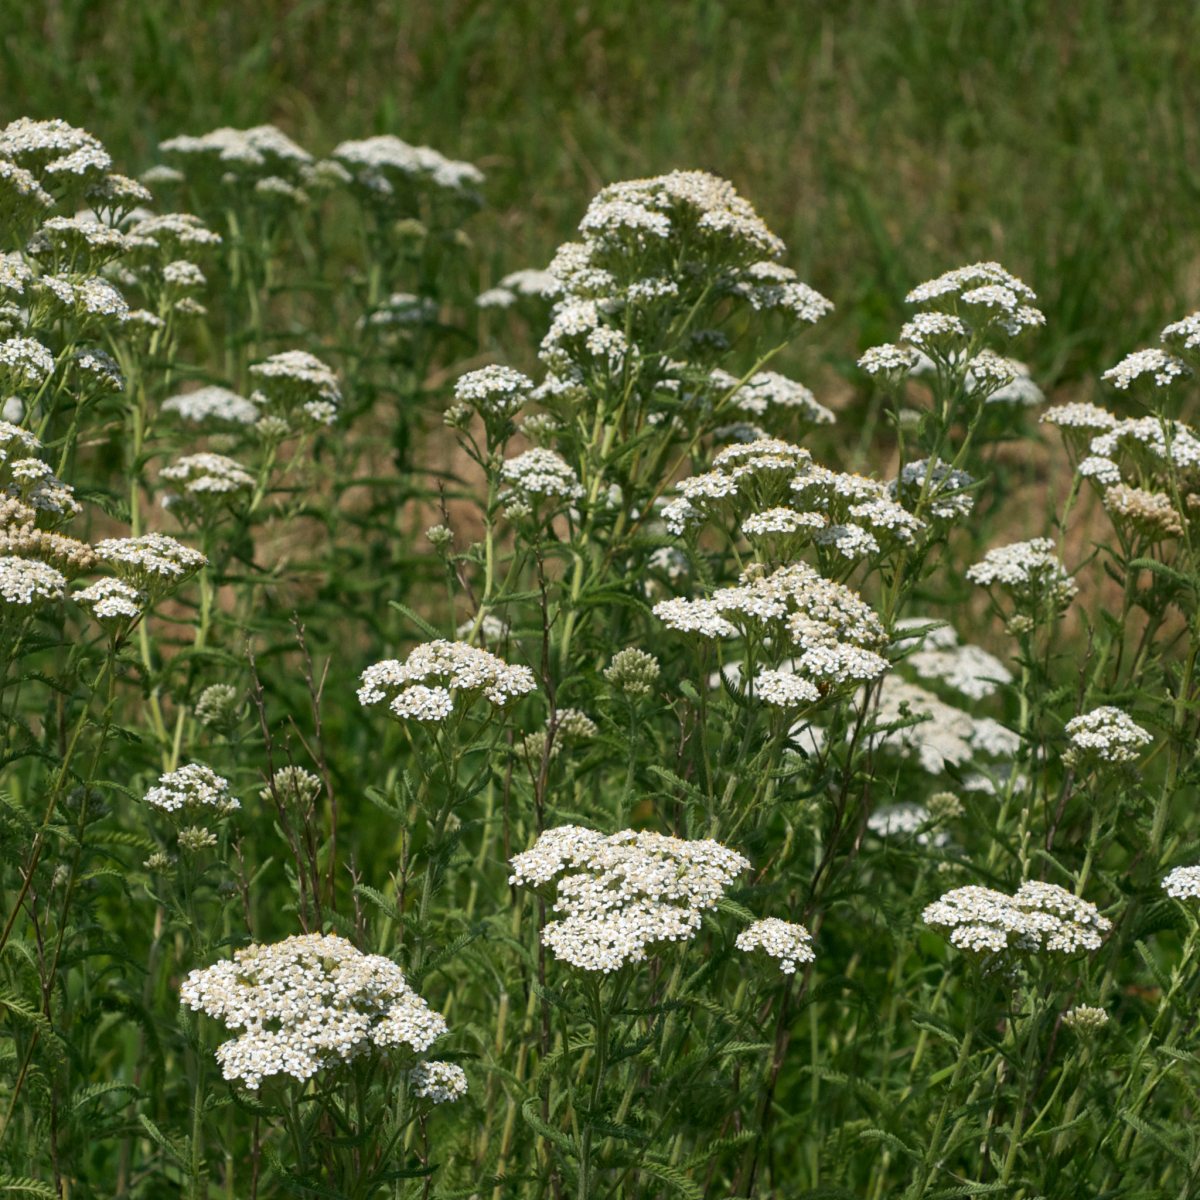 Know Your Natives – Yarrow